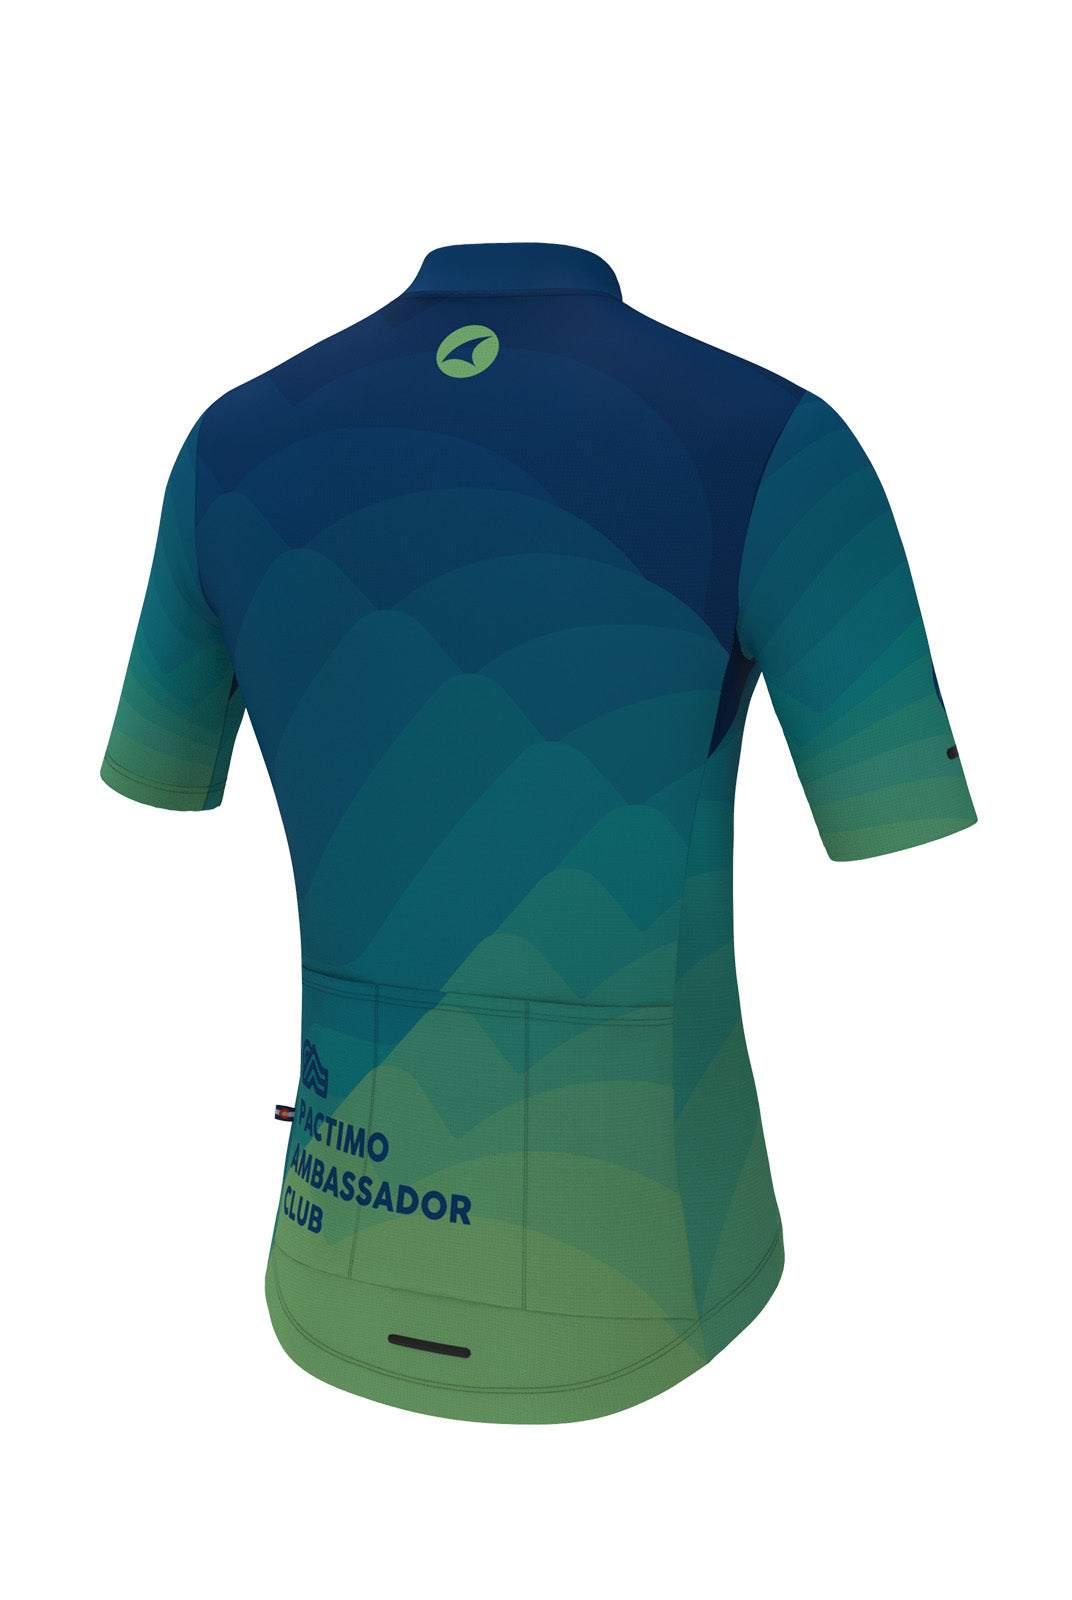 Men's PAC Ascent Aero Cycling Jersey - Twighlight Back View